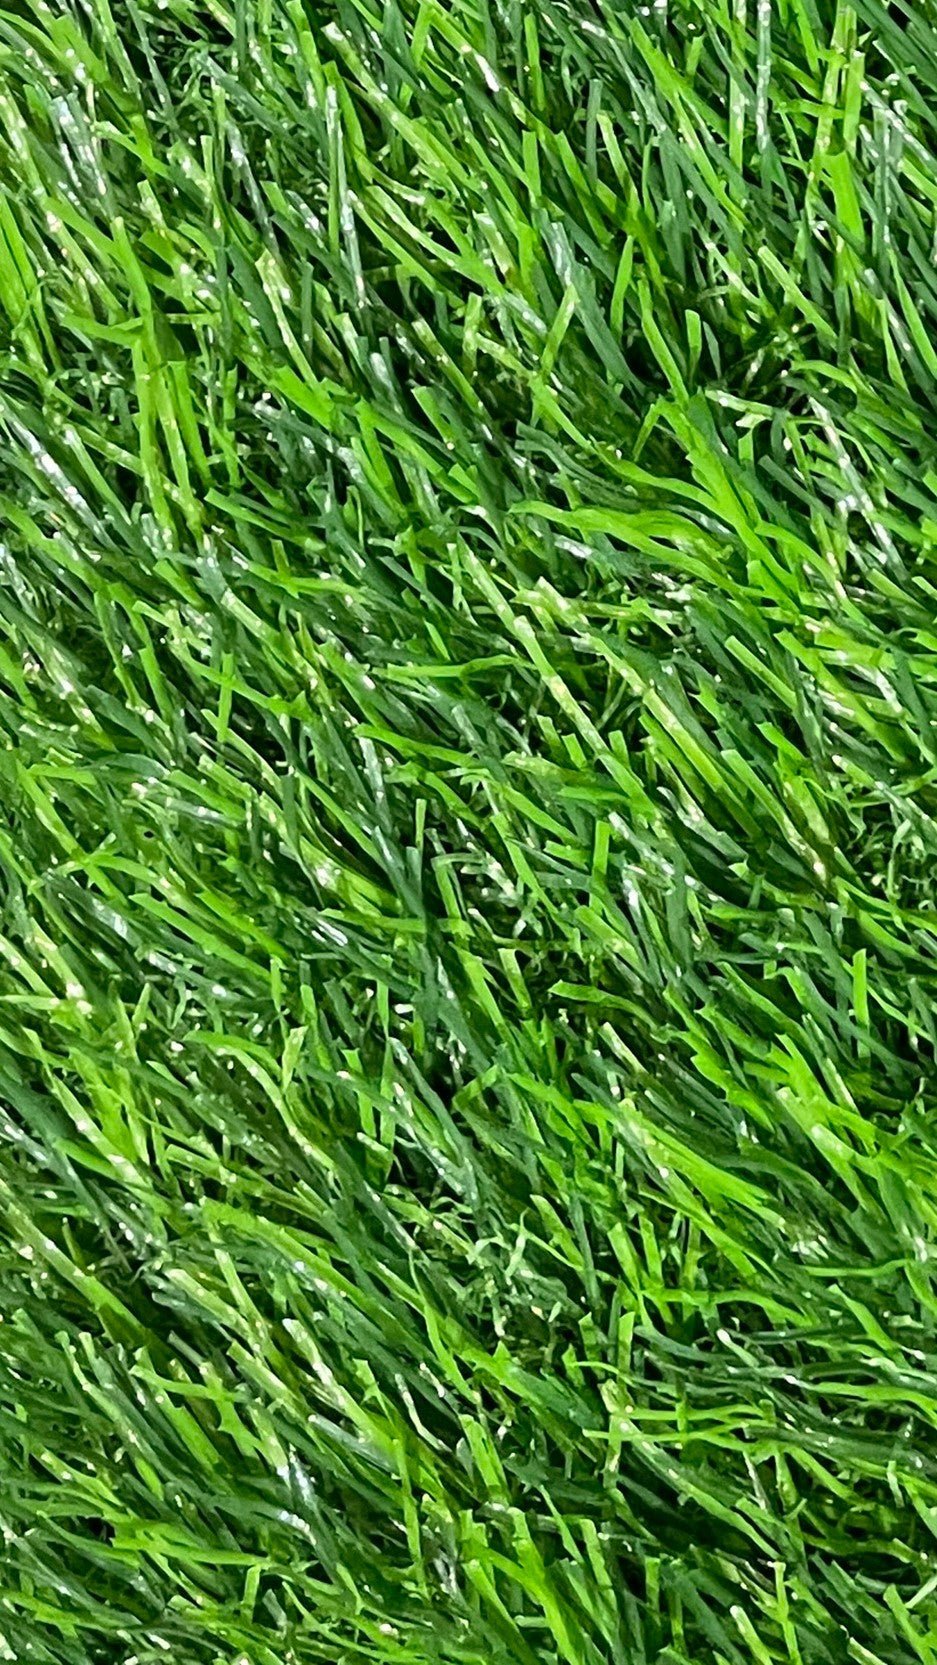 50 MM Grass Munich Artificial Grass for Indoor and Outdoor Use, Soft and Lush Natural Looking - V Surfaces